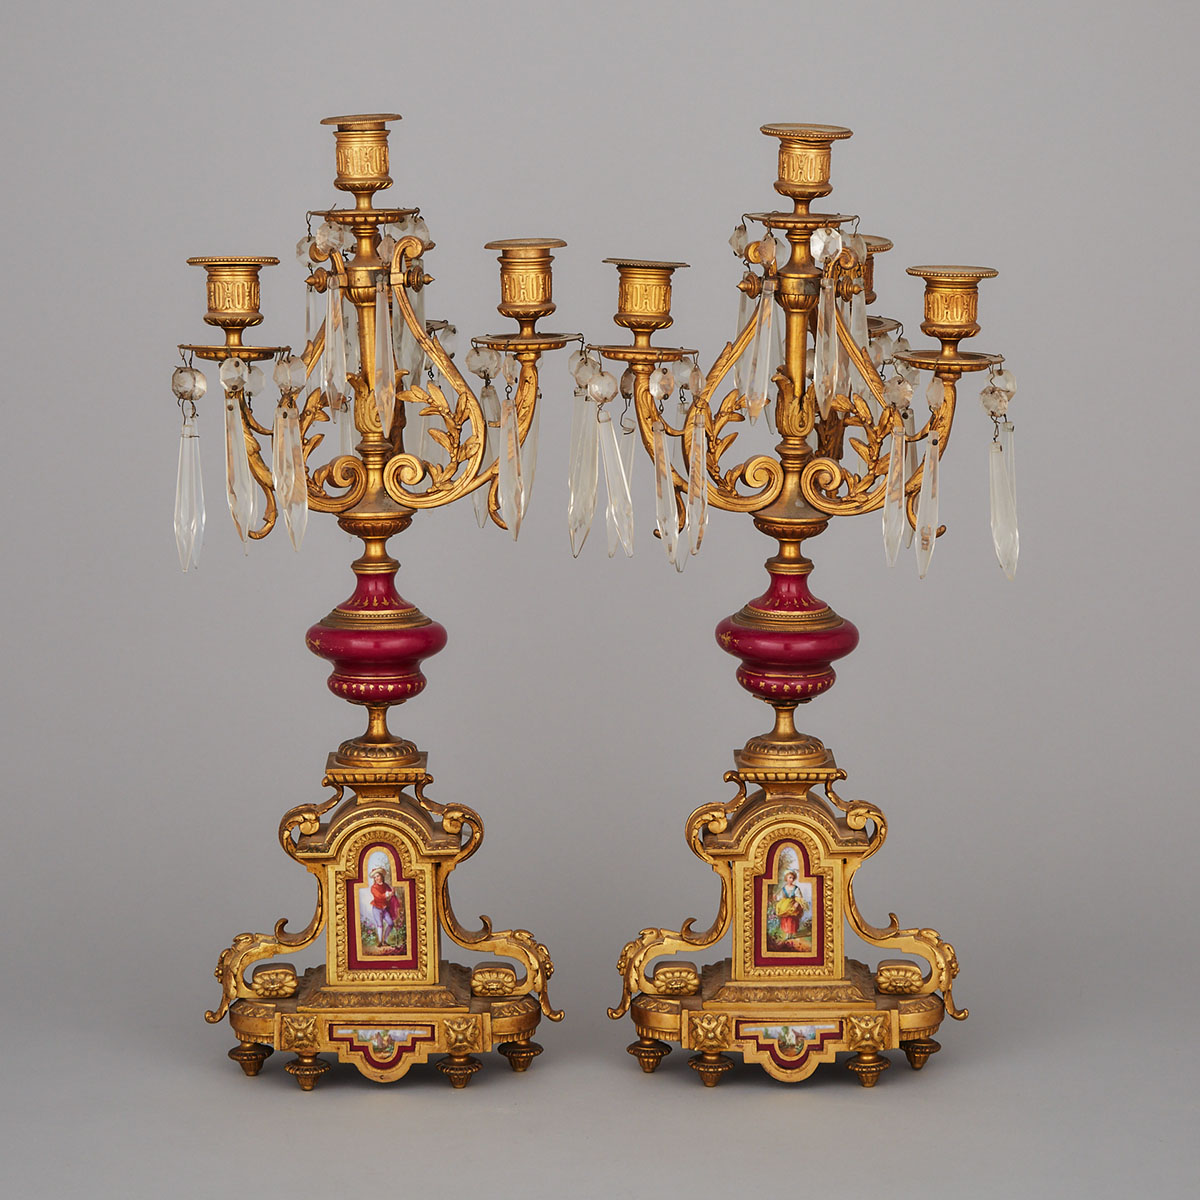 Pair of French Sevres Style Porcelain Mounted Gilt Bronze Mantle Garniture Candelabras, late 19th century